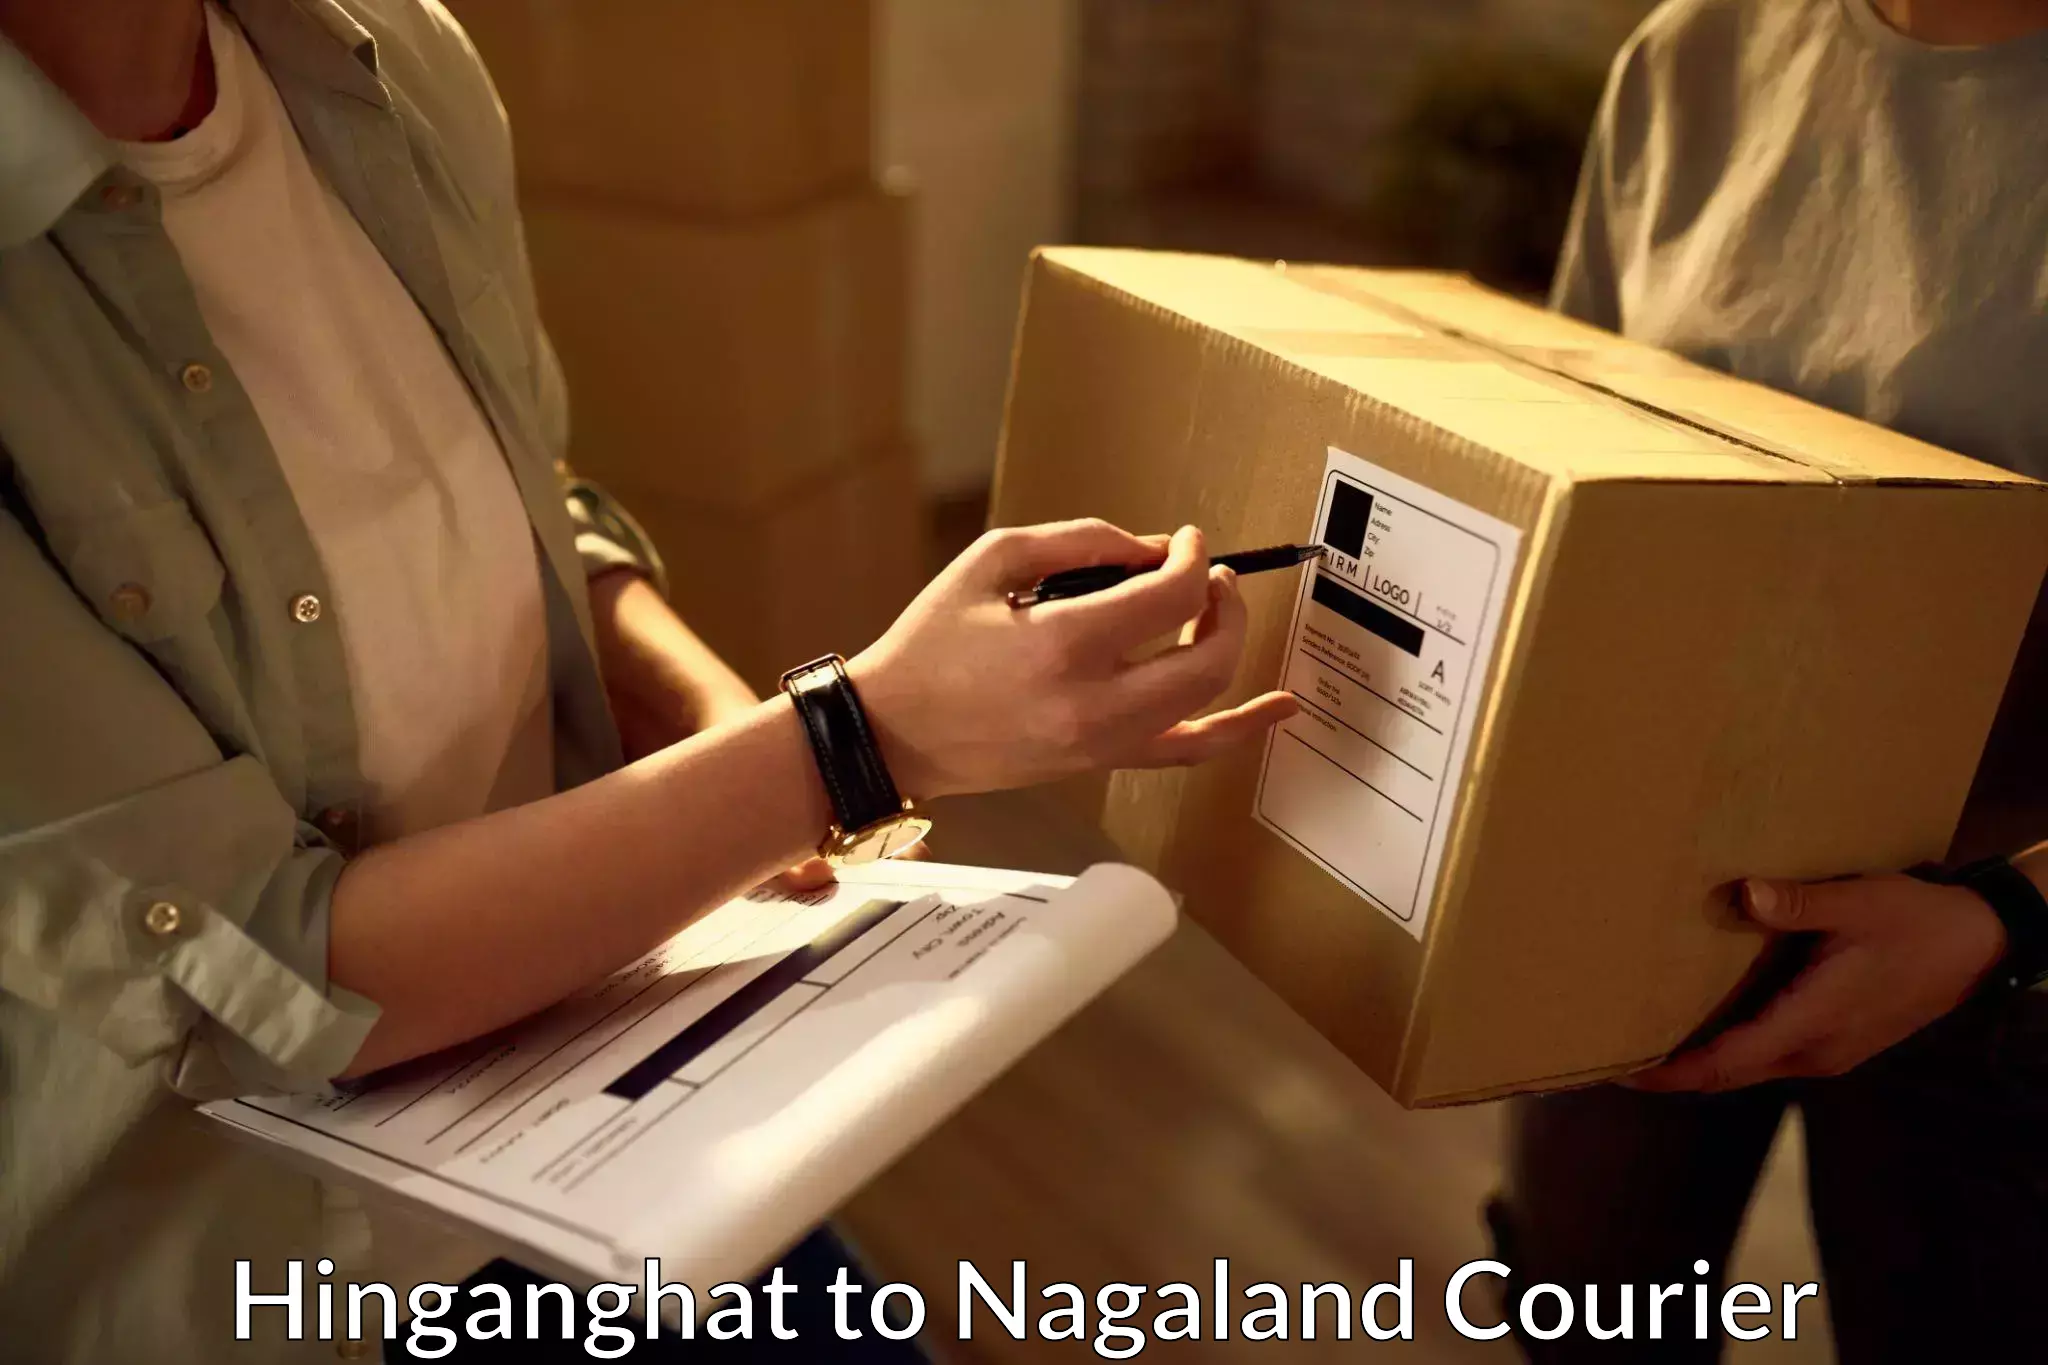 Reliable delivery network Hinganghat to Mon